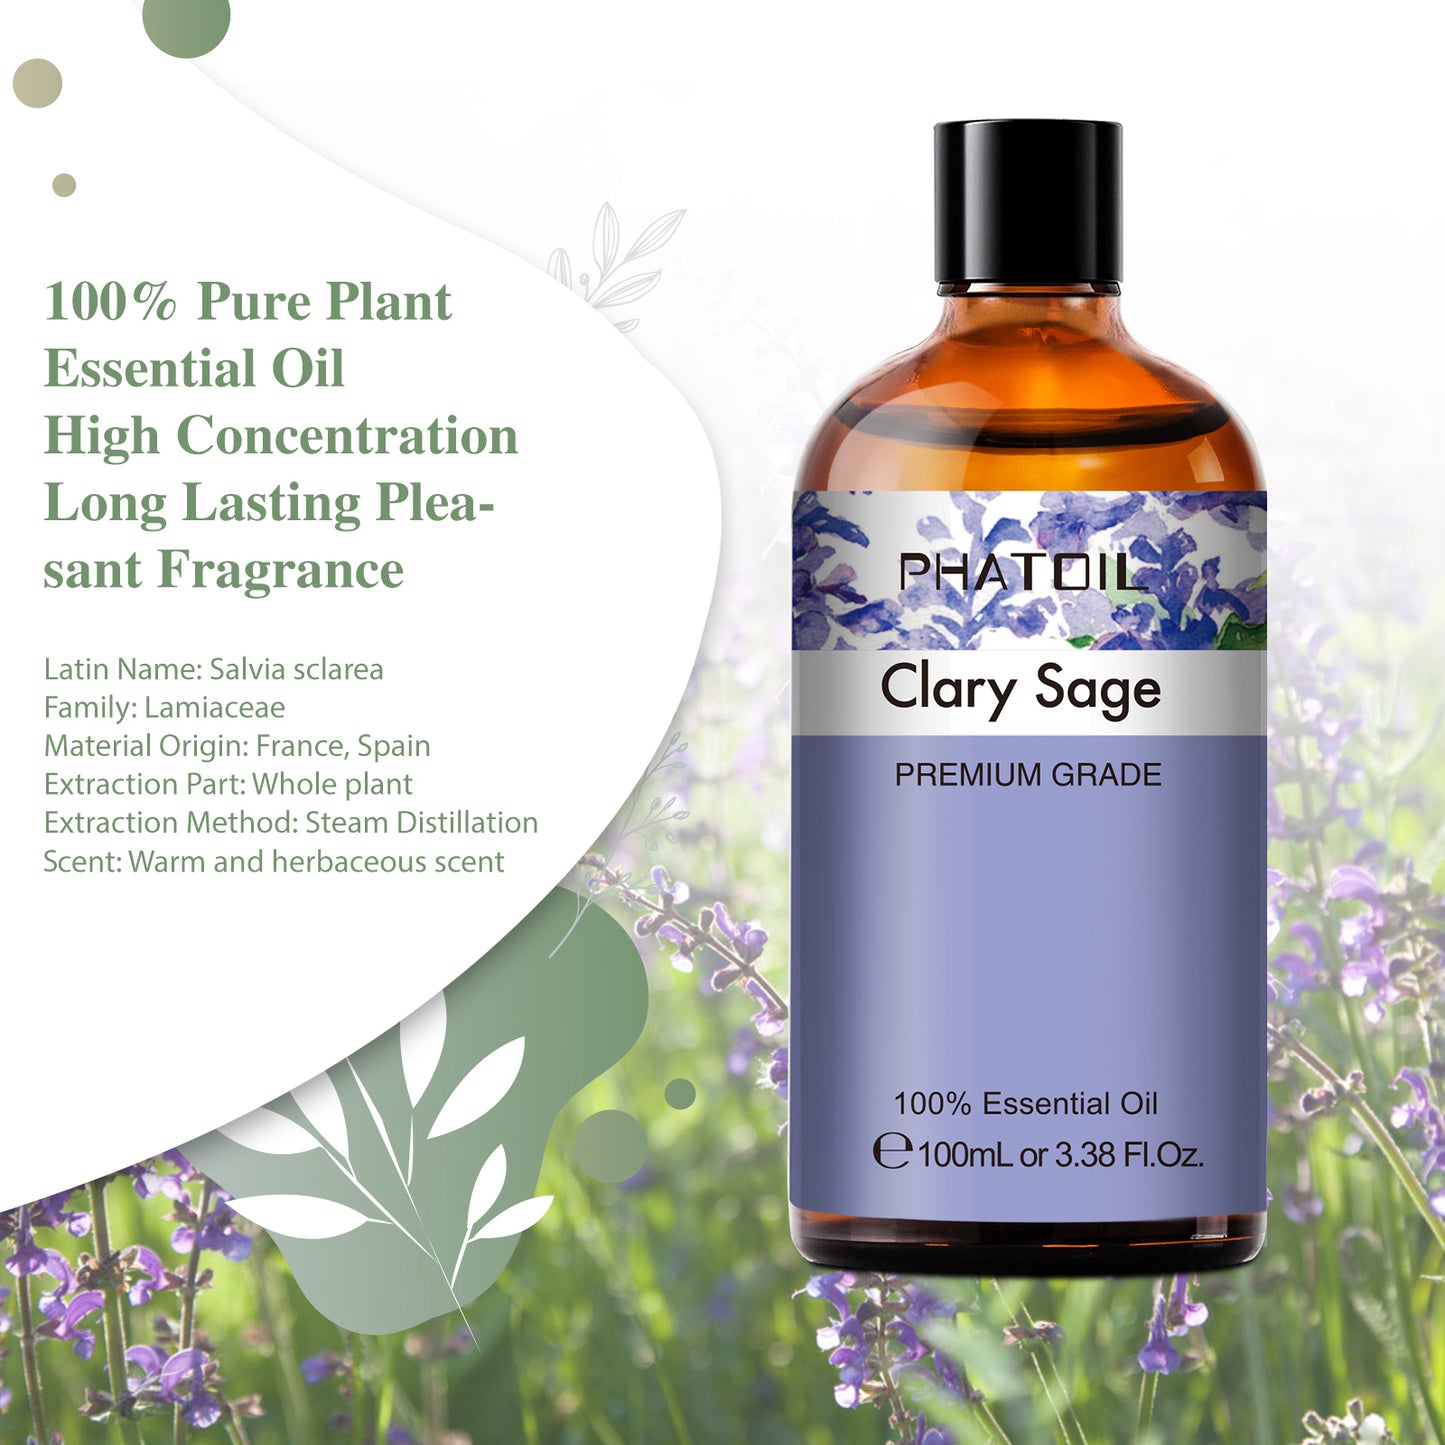 clary sage essential oil diffuser